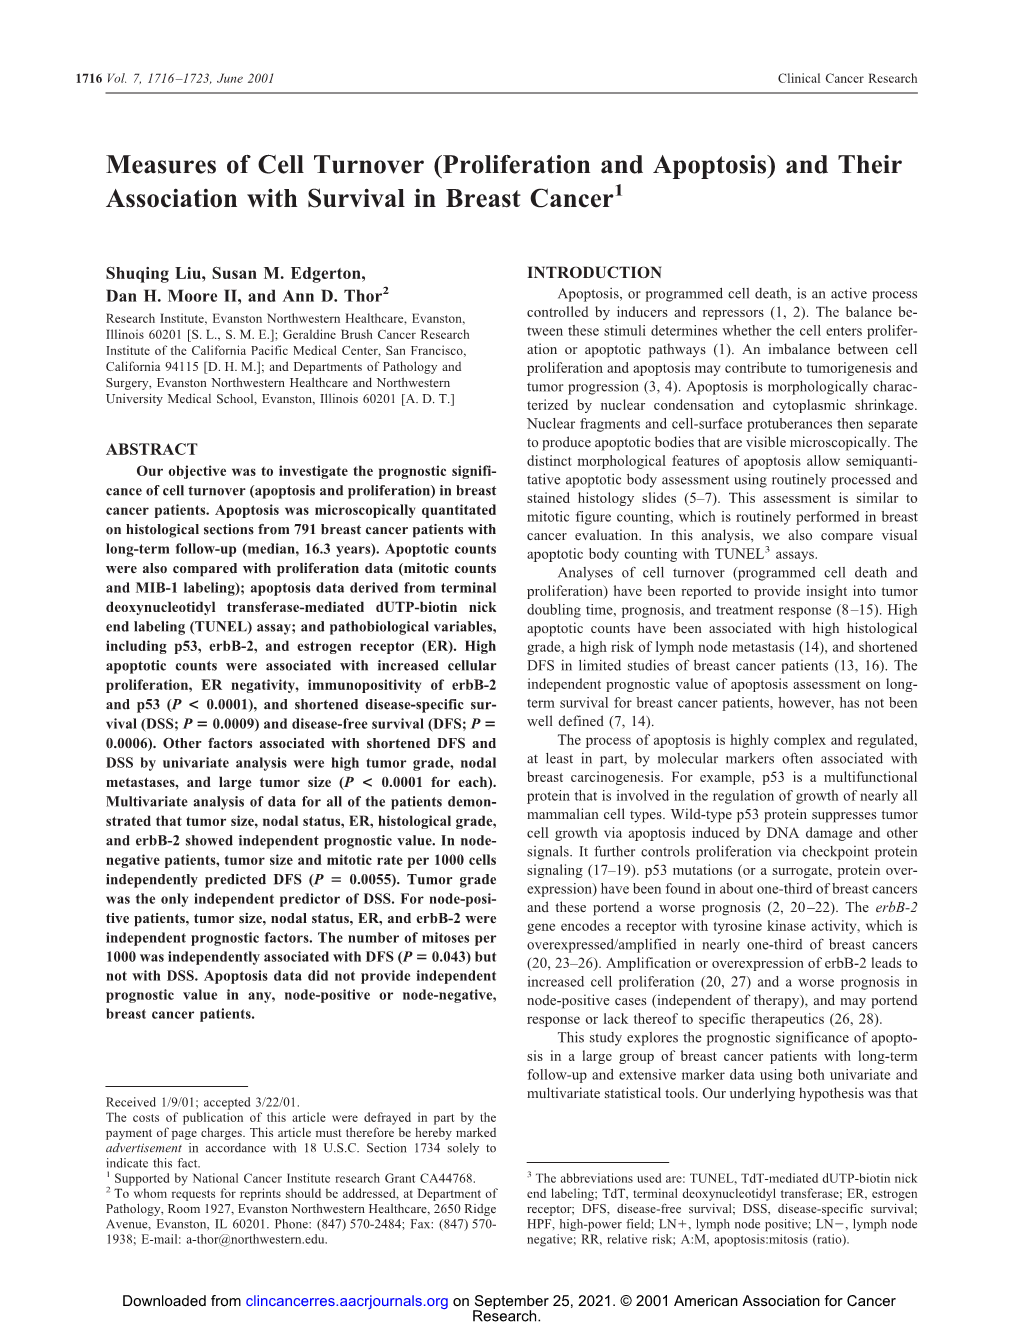 Measures of Cell Turnover (Proliferation and Apoptosis) and Their Association with Survival in Breast Cancer1